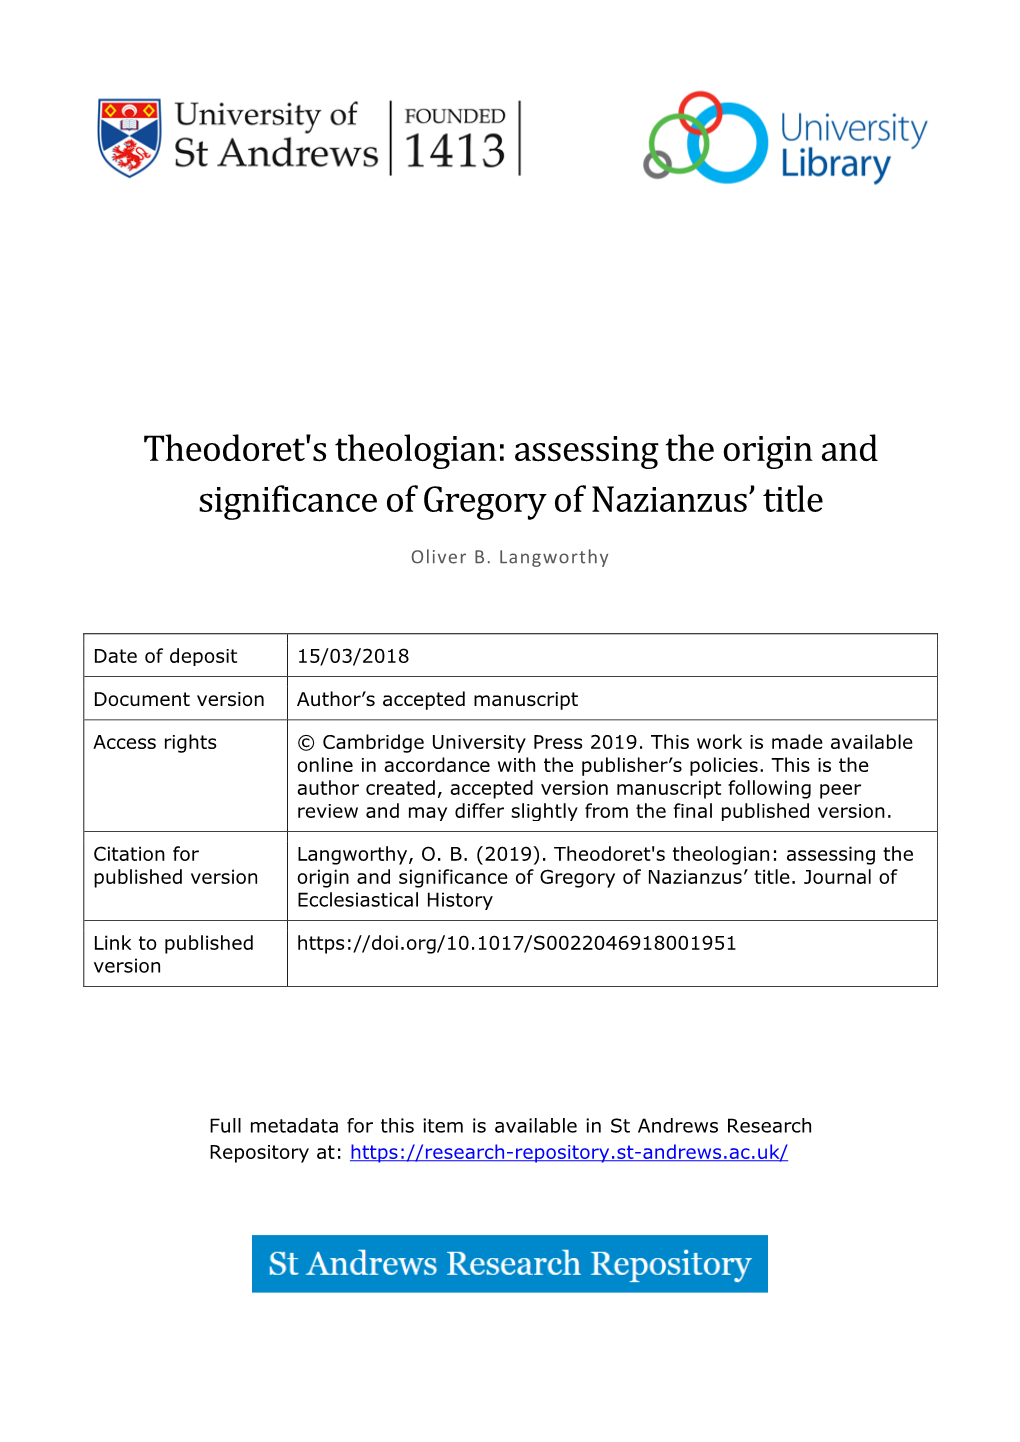 Theodoret's Theologian: Assessing the Origin and Significance of Gregory